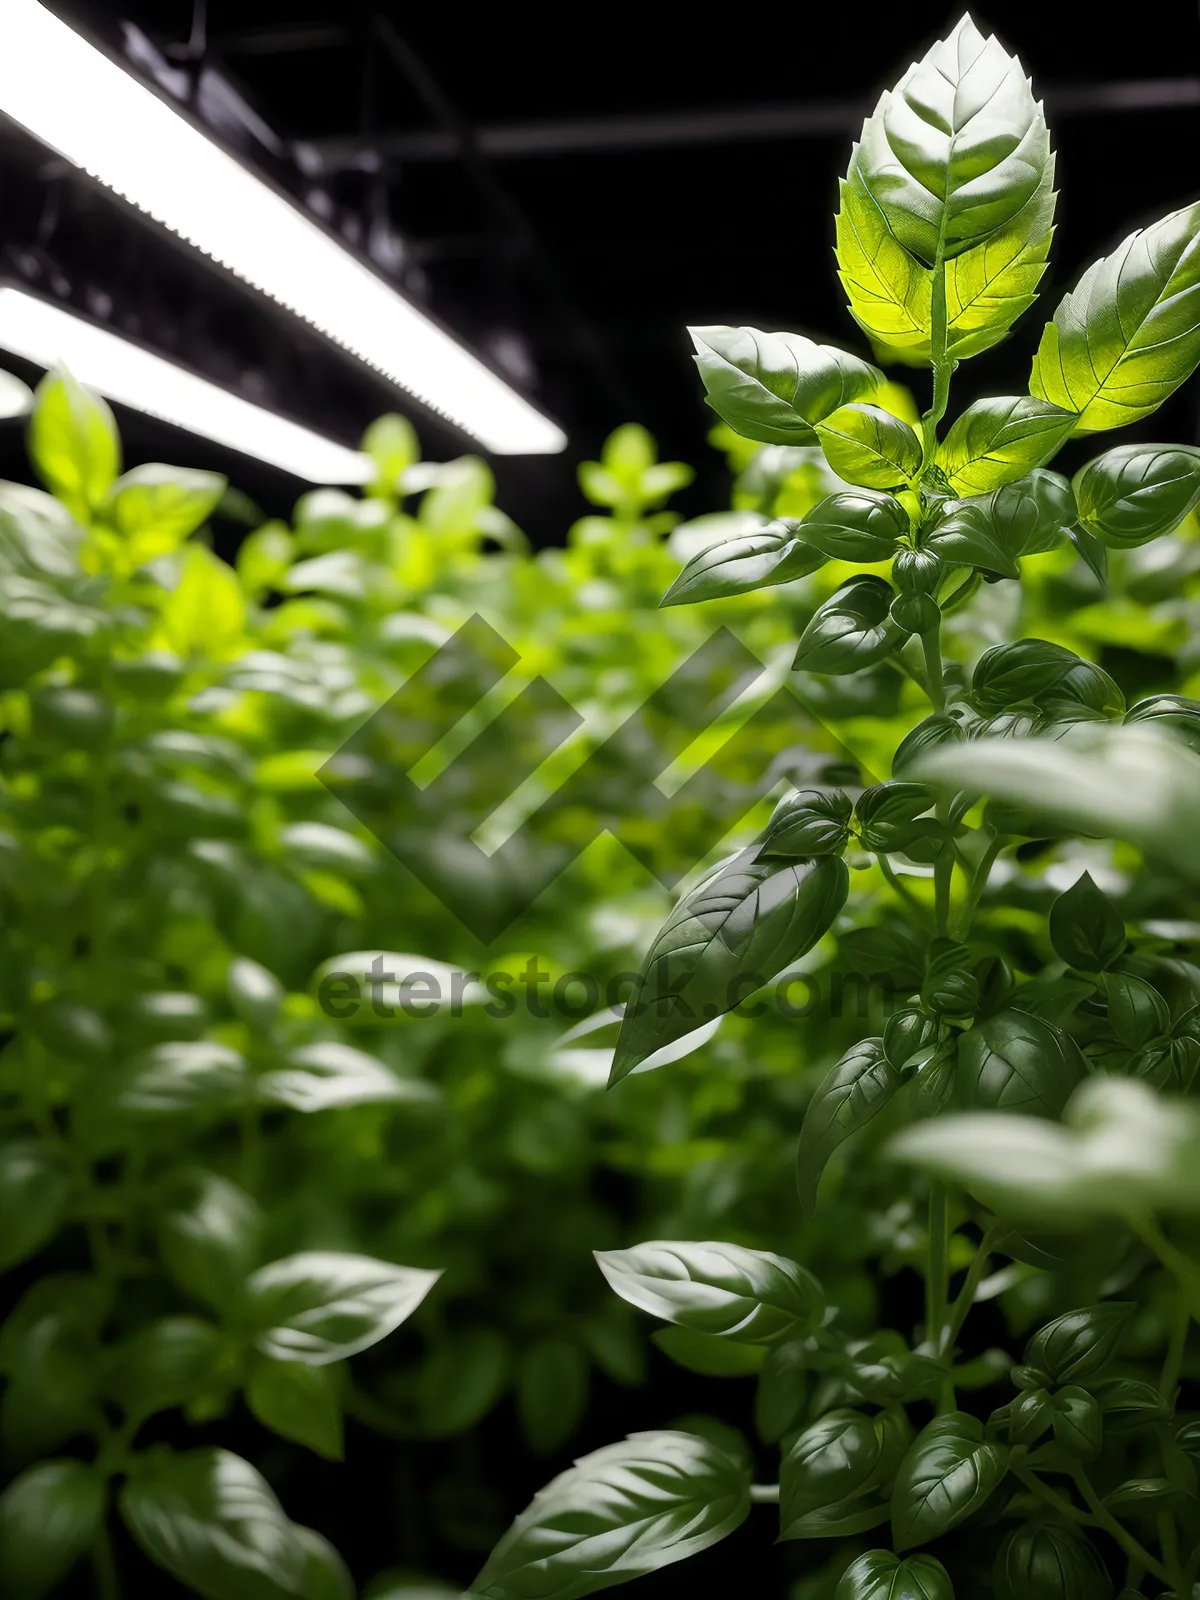 Picture of Organic Basil Leaves: Fresh Garden Herb with Natural Vascular Plant Growth